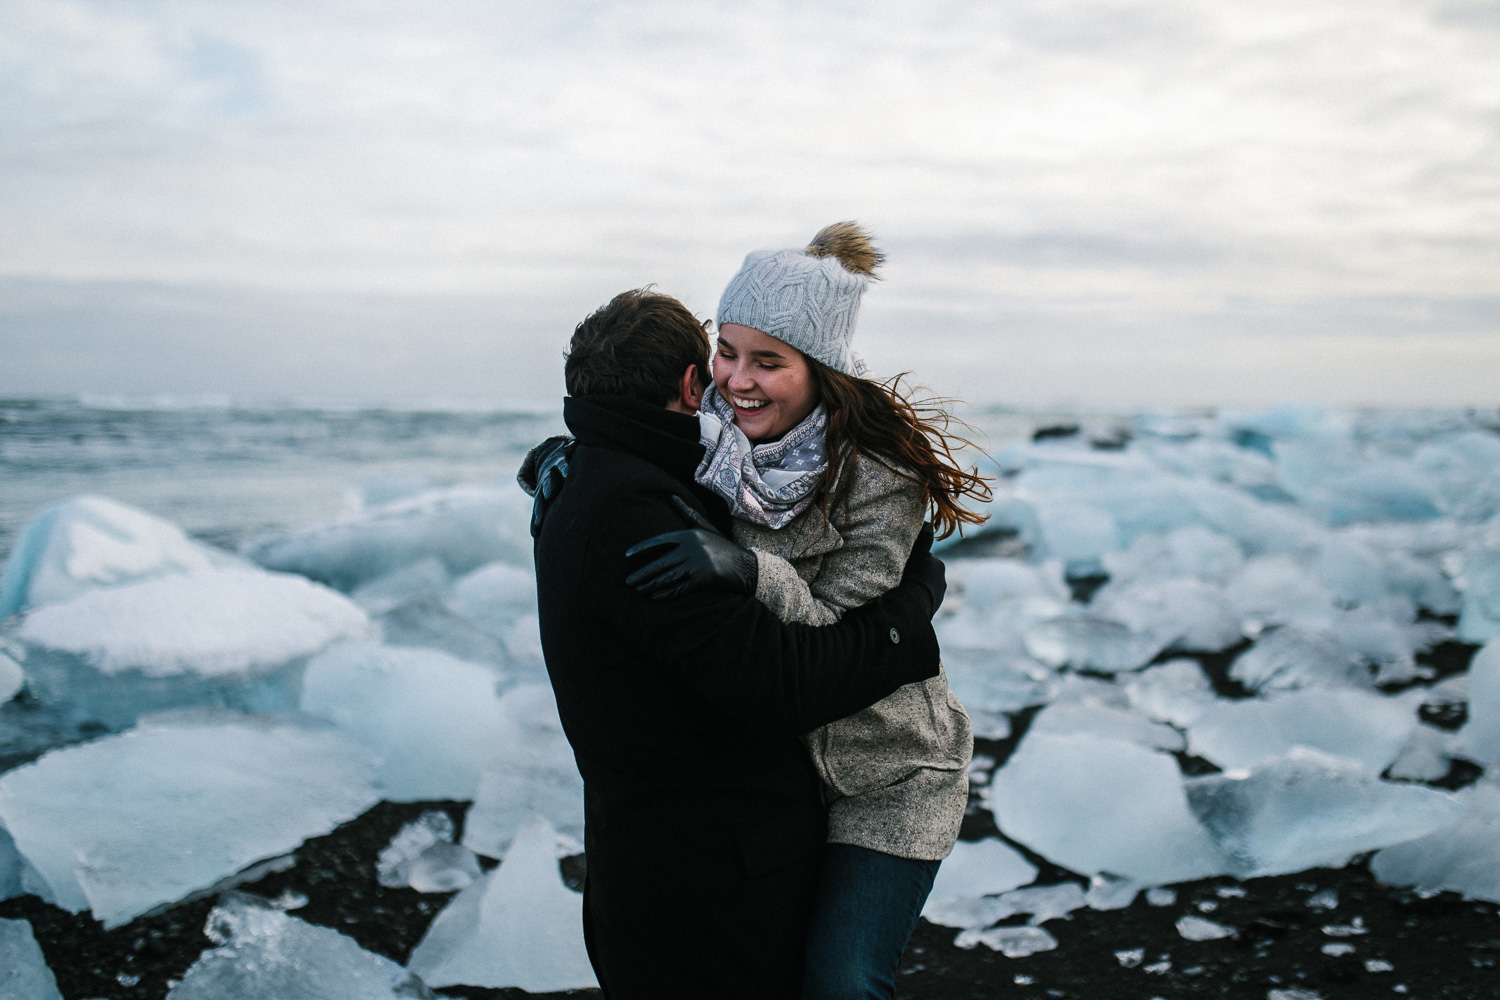 Iceland-engagement-photoshoot-47-1 Kaitlin and Mike // Iceland engagement photography